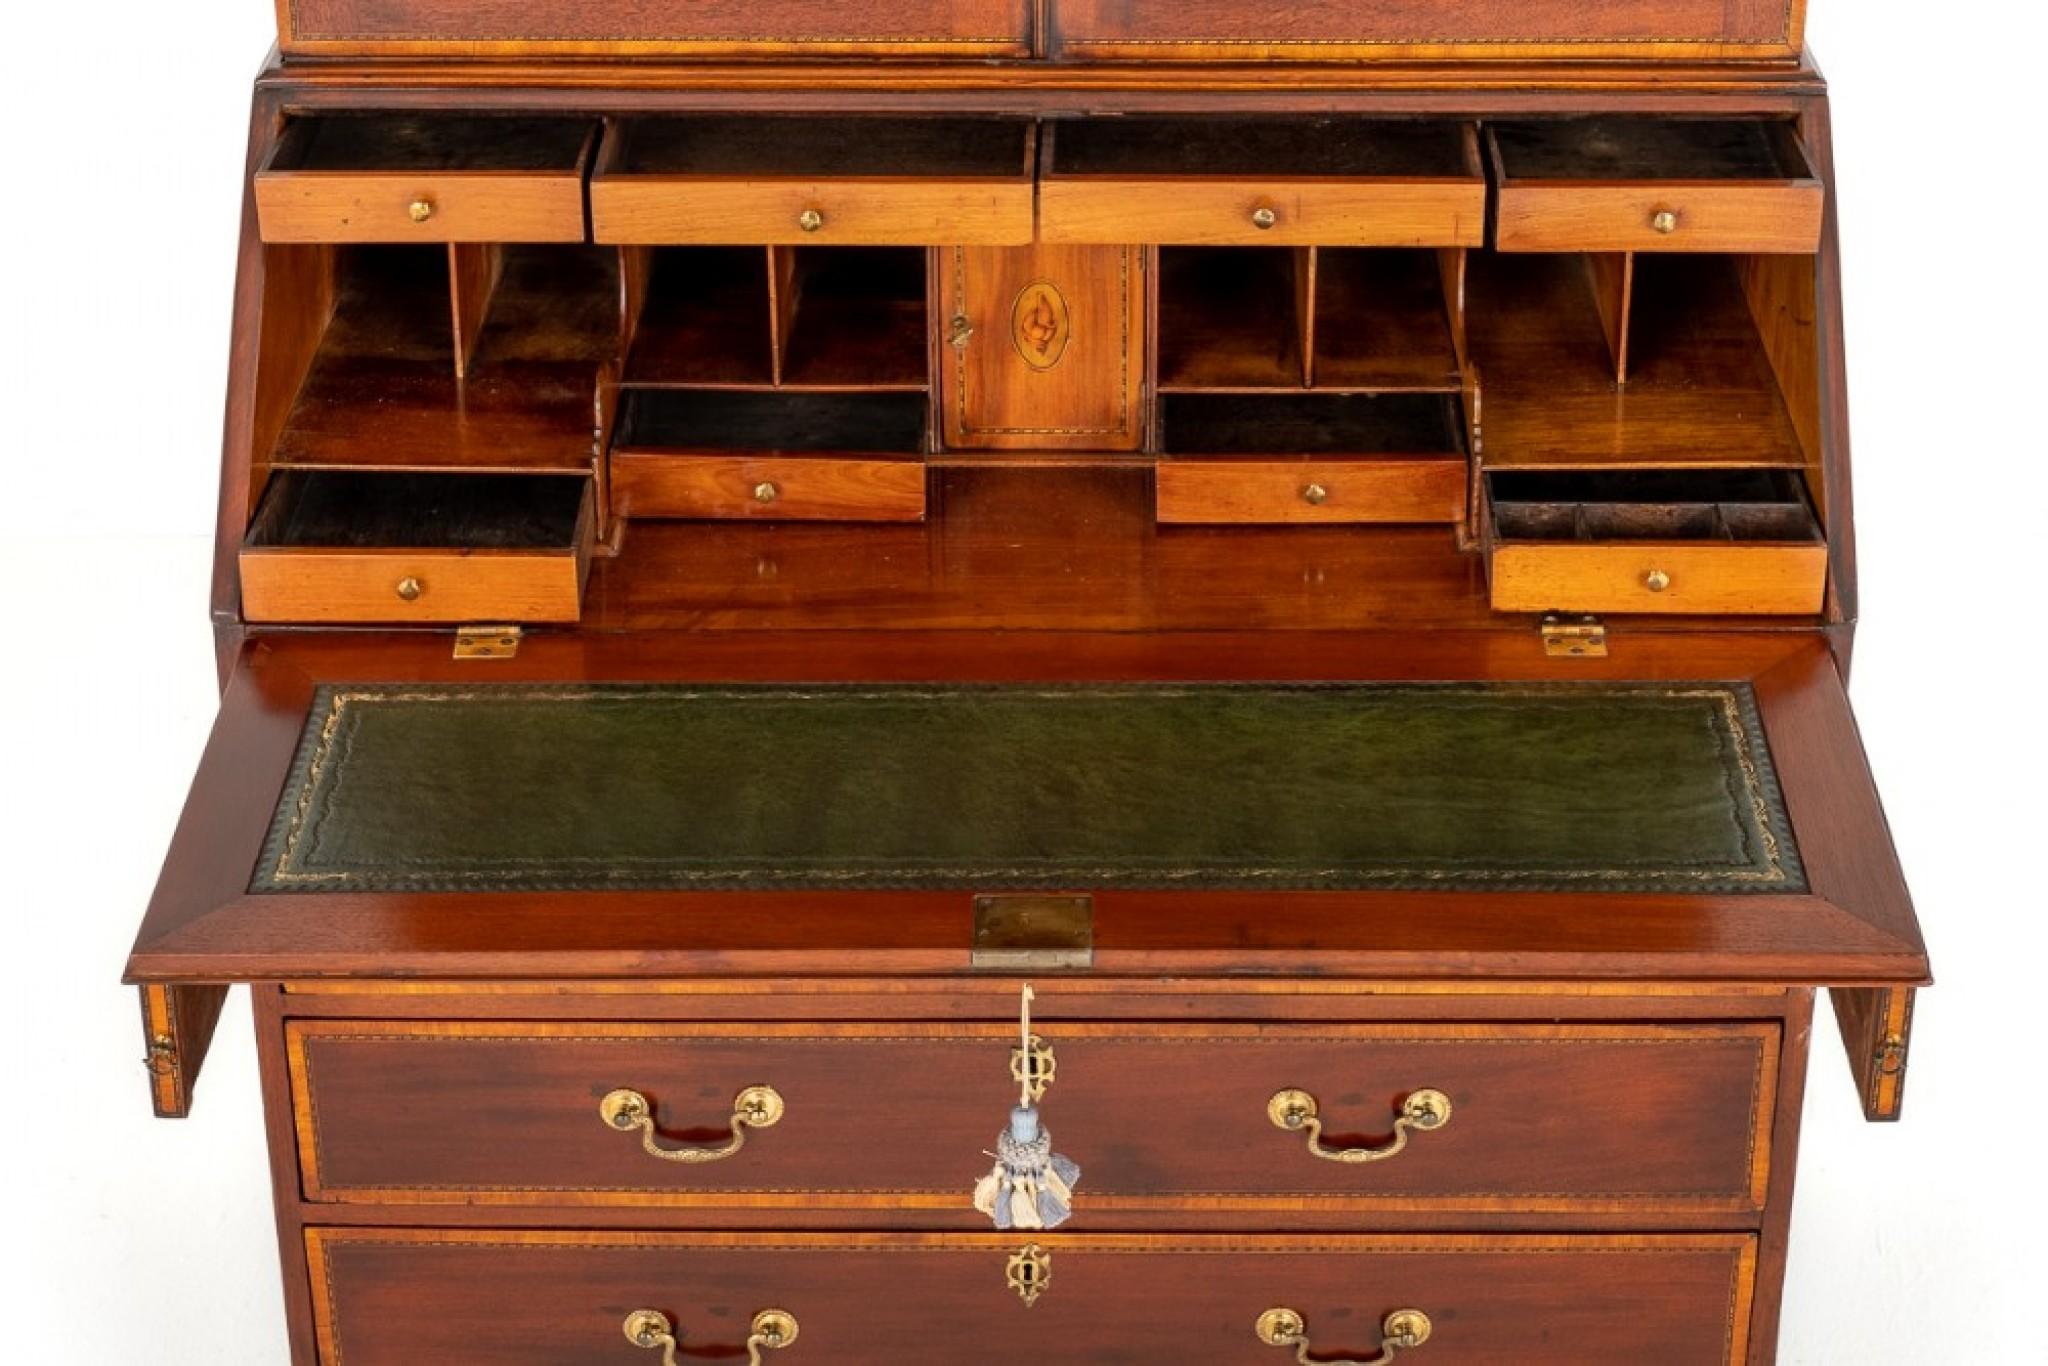 Georgian Mahogany Bureau Bookcase.
Circa 1800
The Base Having an Arrangement of 2 Over 3 Oak Lined Drawers With Brass Swan Neck handles.
The Fall Opens to Reveal a Leather Writing Surface (replacement) with hand Applied Gilt and Blind Tooling and